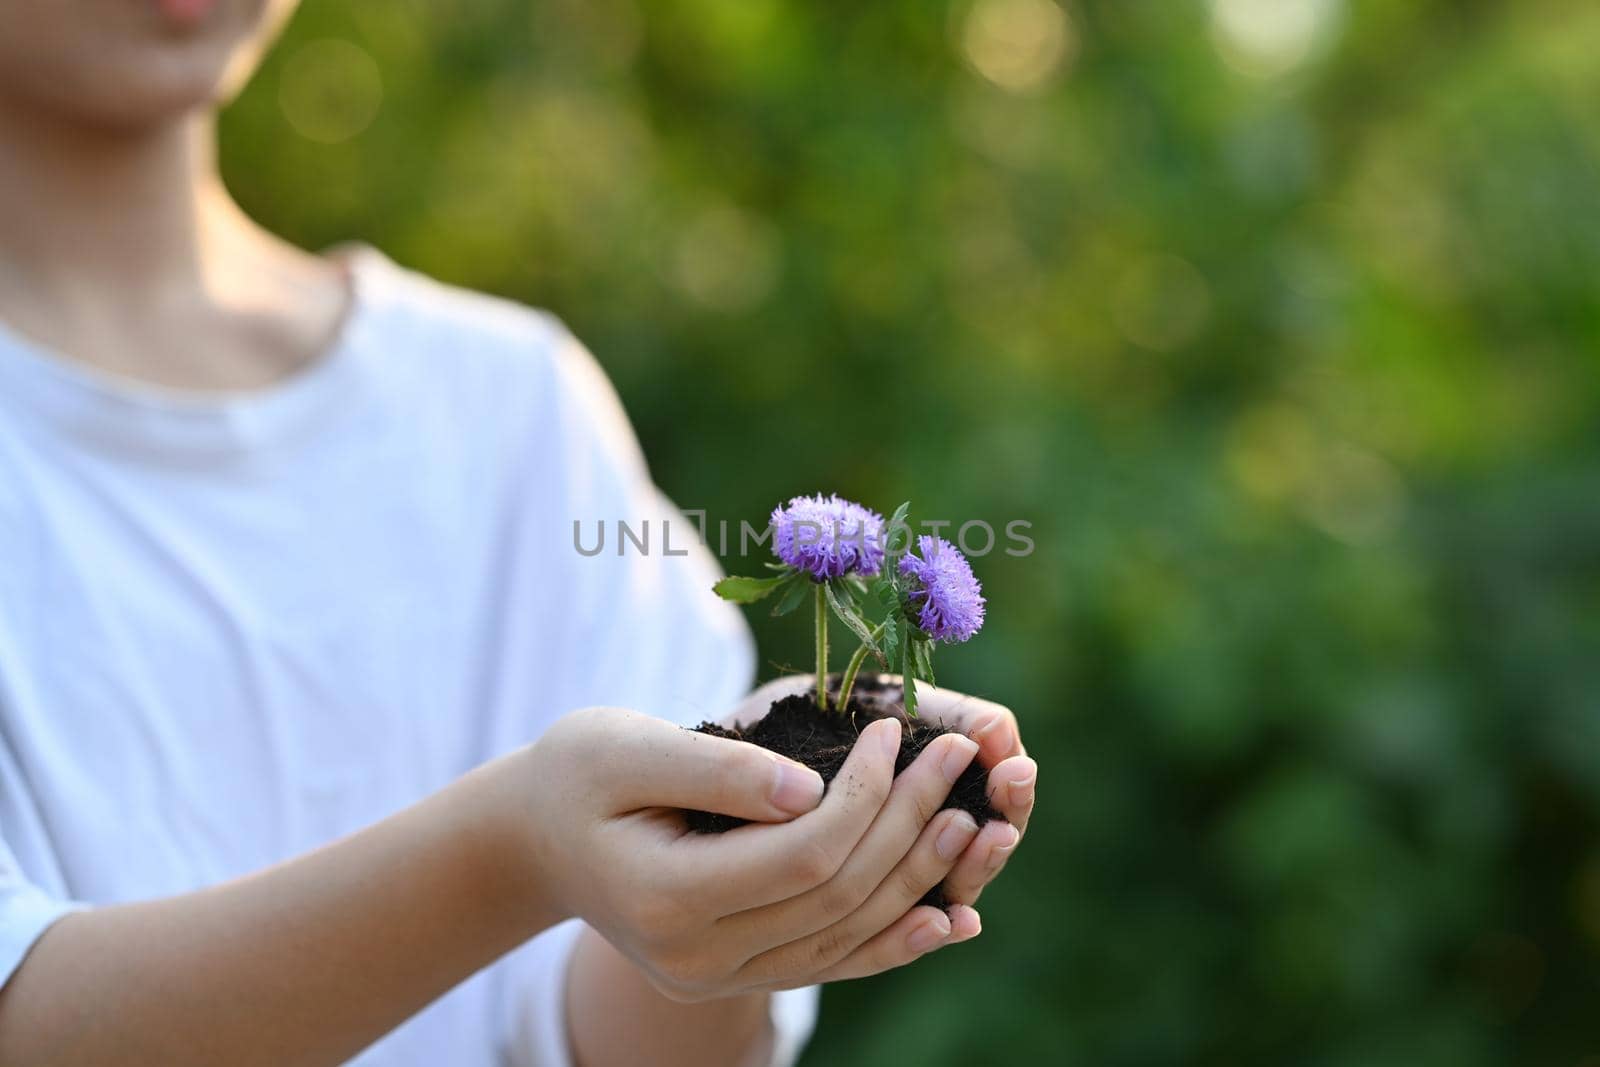 Little girl hands holding plant in hands against blurred green nature background. Concept of saving the world, earth day.